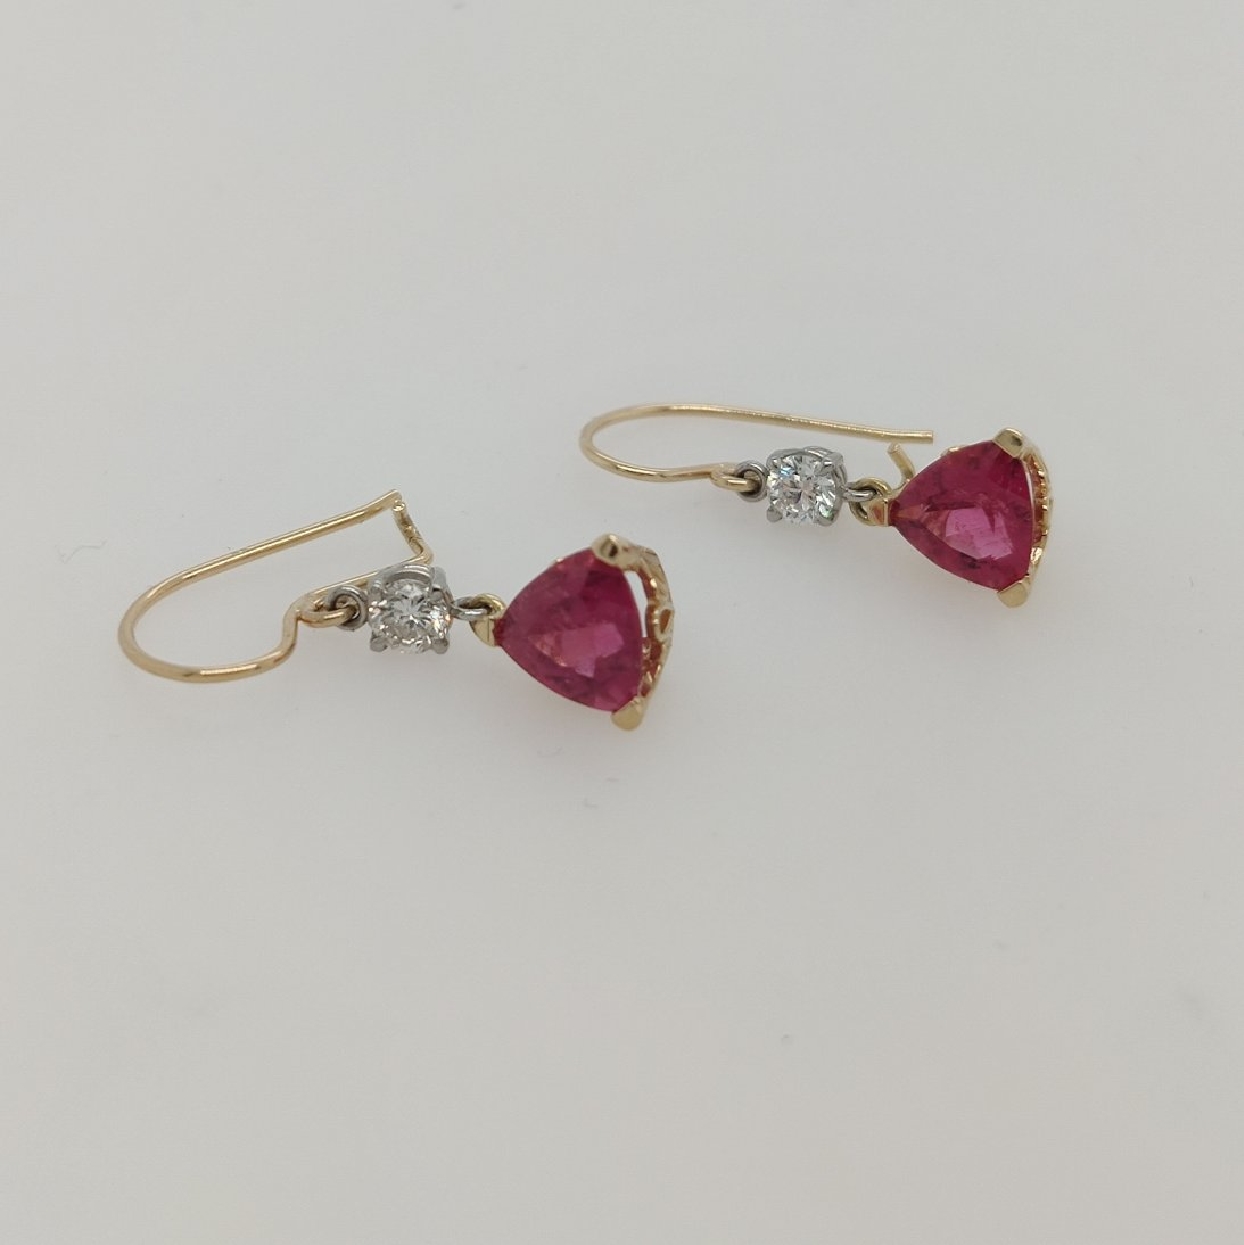 14K Yellow Gold Trillion Cut Rubellite Earrings with Platinum Set Diamond Accents on French Ear Wires